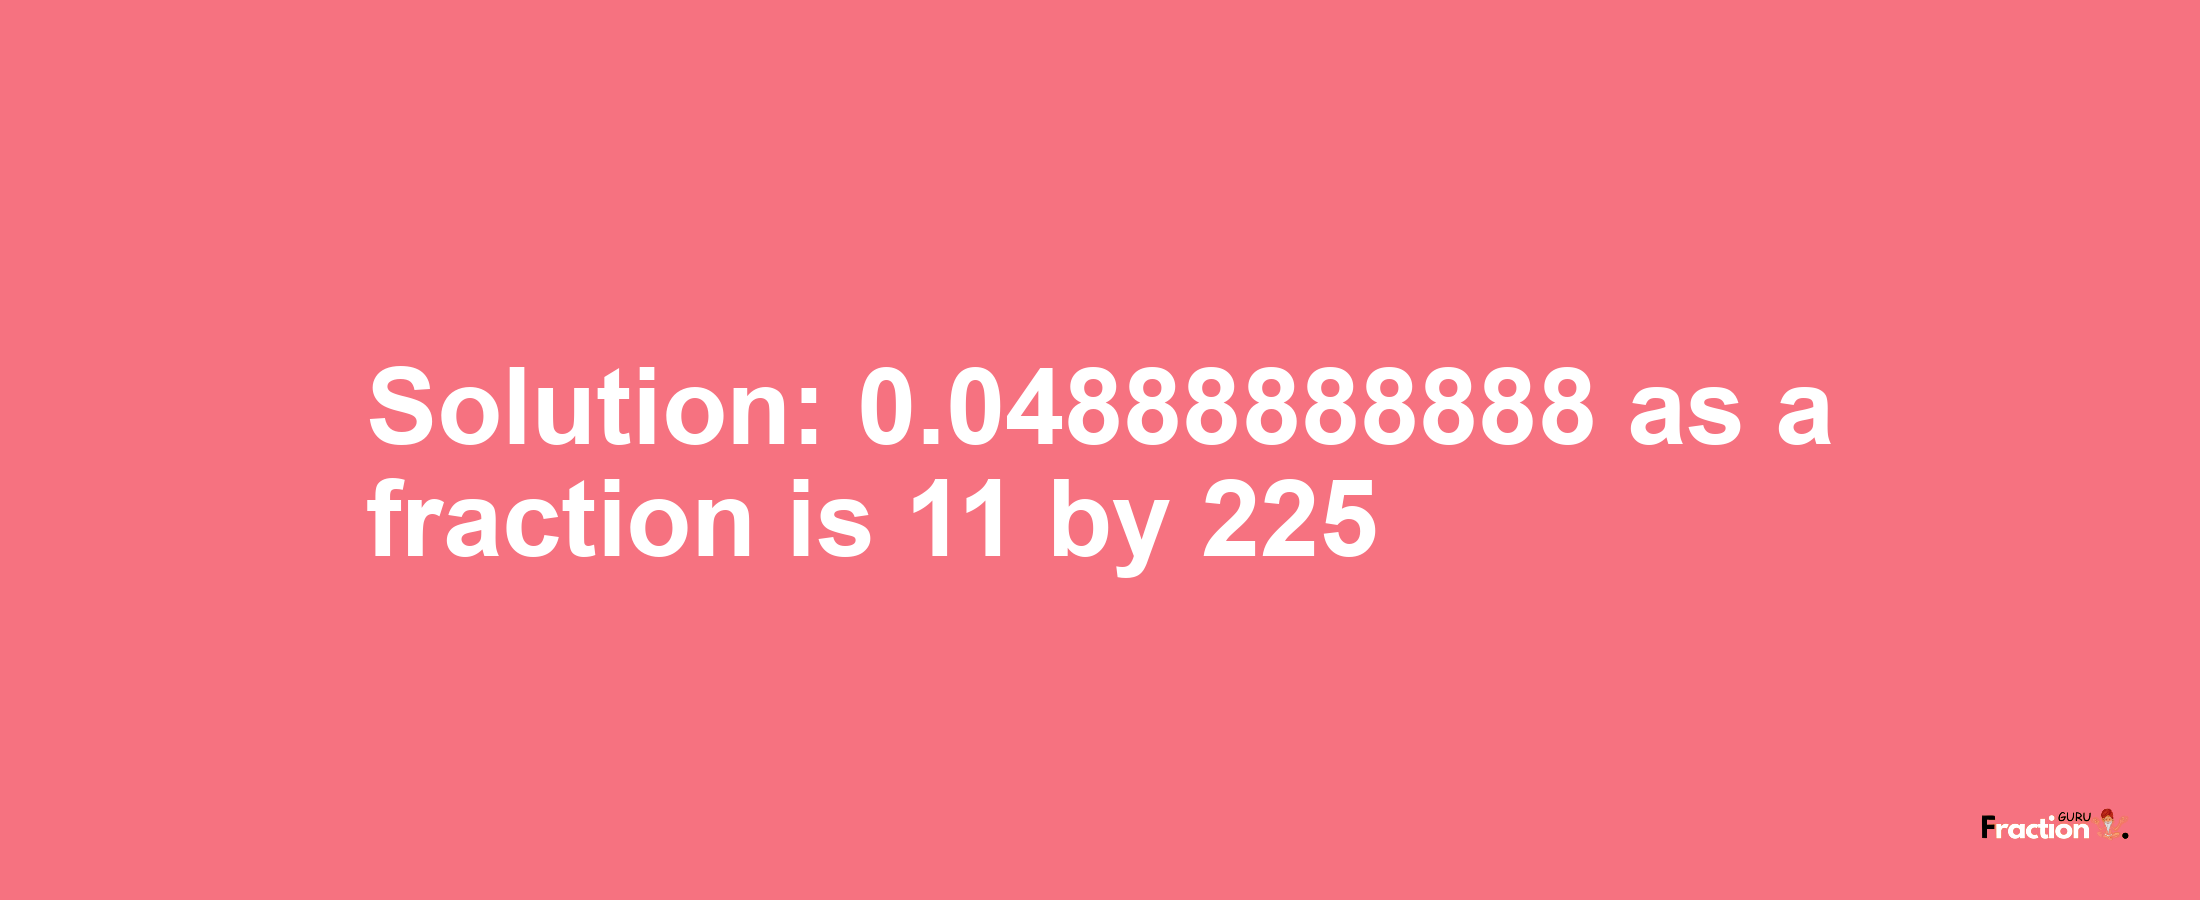 Solution:0.04888888888 as a fraction is 11/225